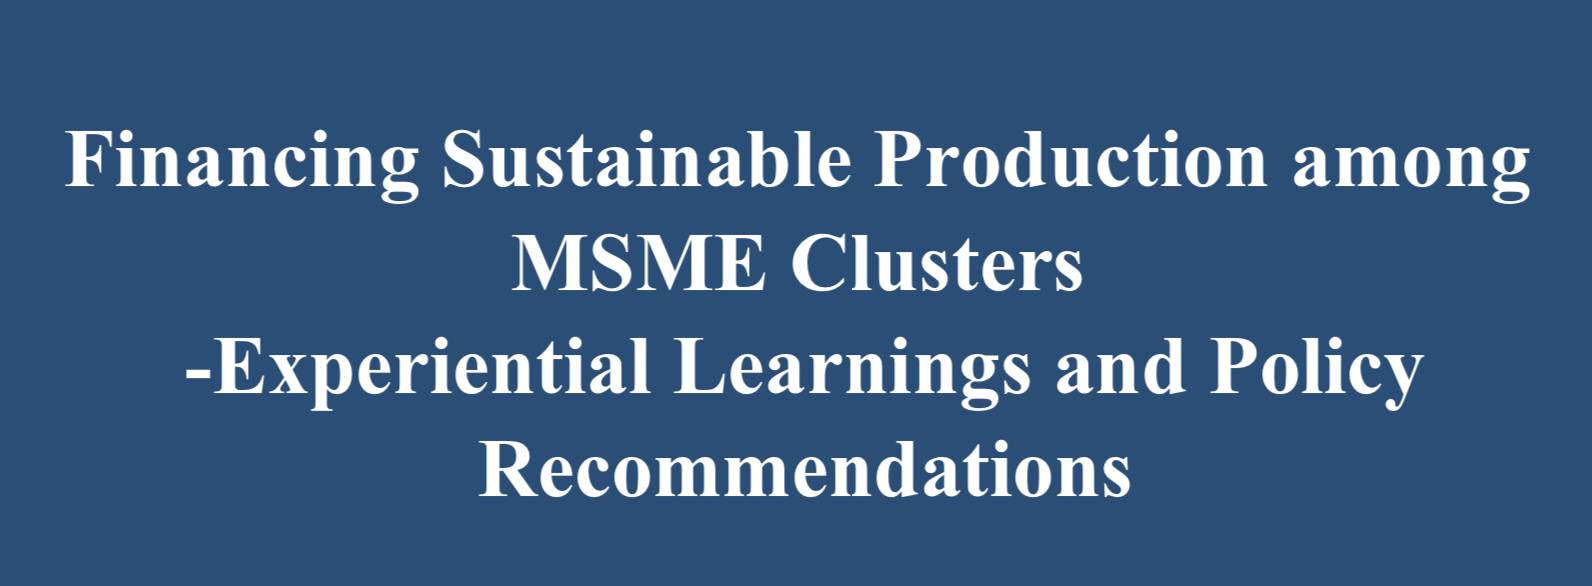 Financing Sustainable Production among MSME Clusters, Experiential Learning and Policy Recommendations